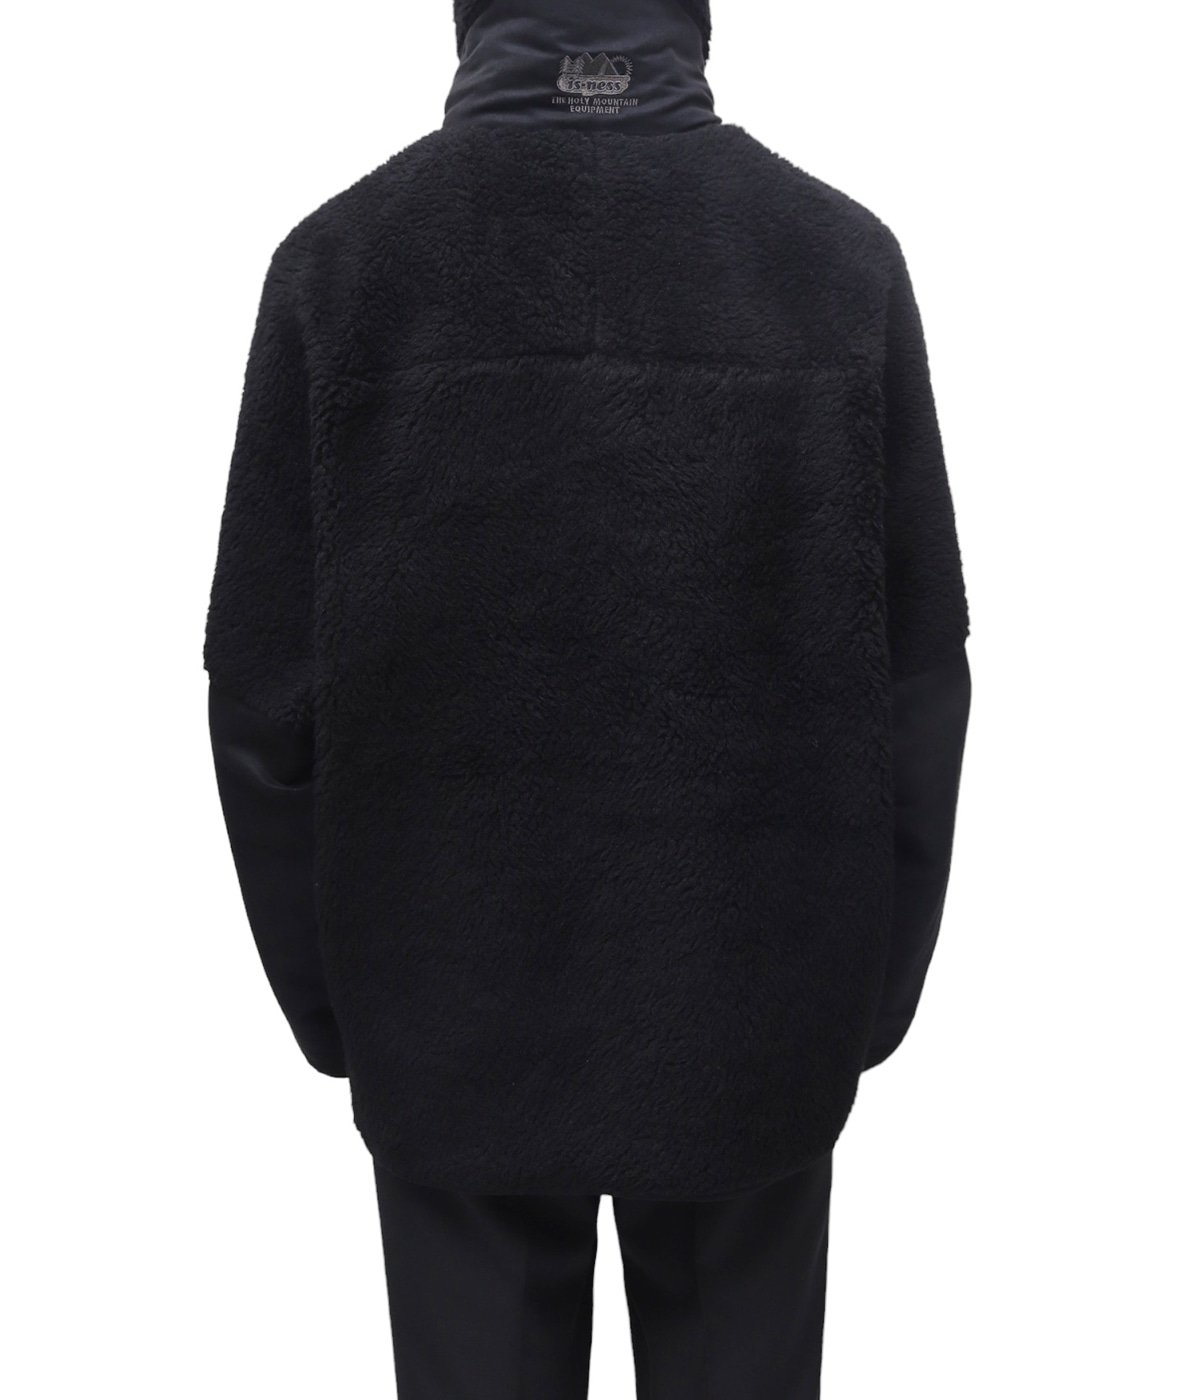 THM FLEECE JACKET is-ness×Y(dot)BY NORDISK | is-ness(イズネス ...